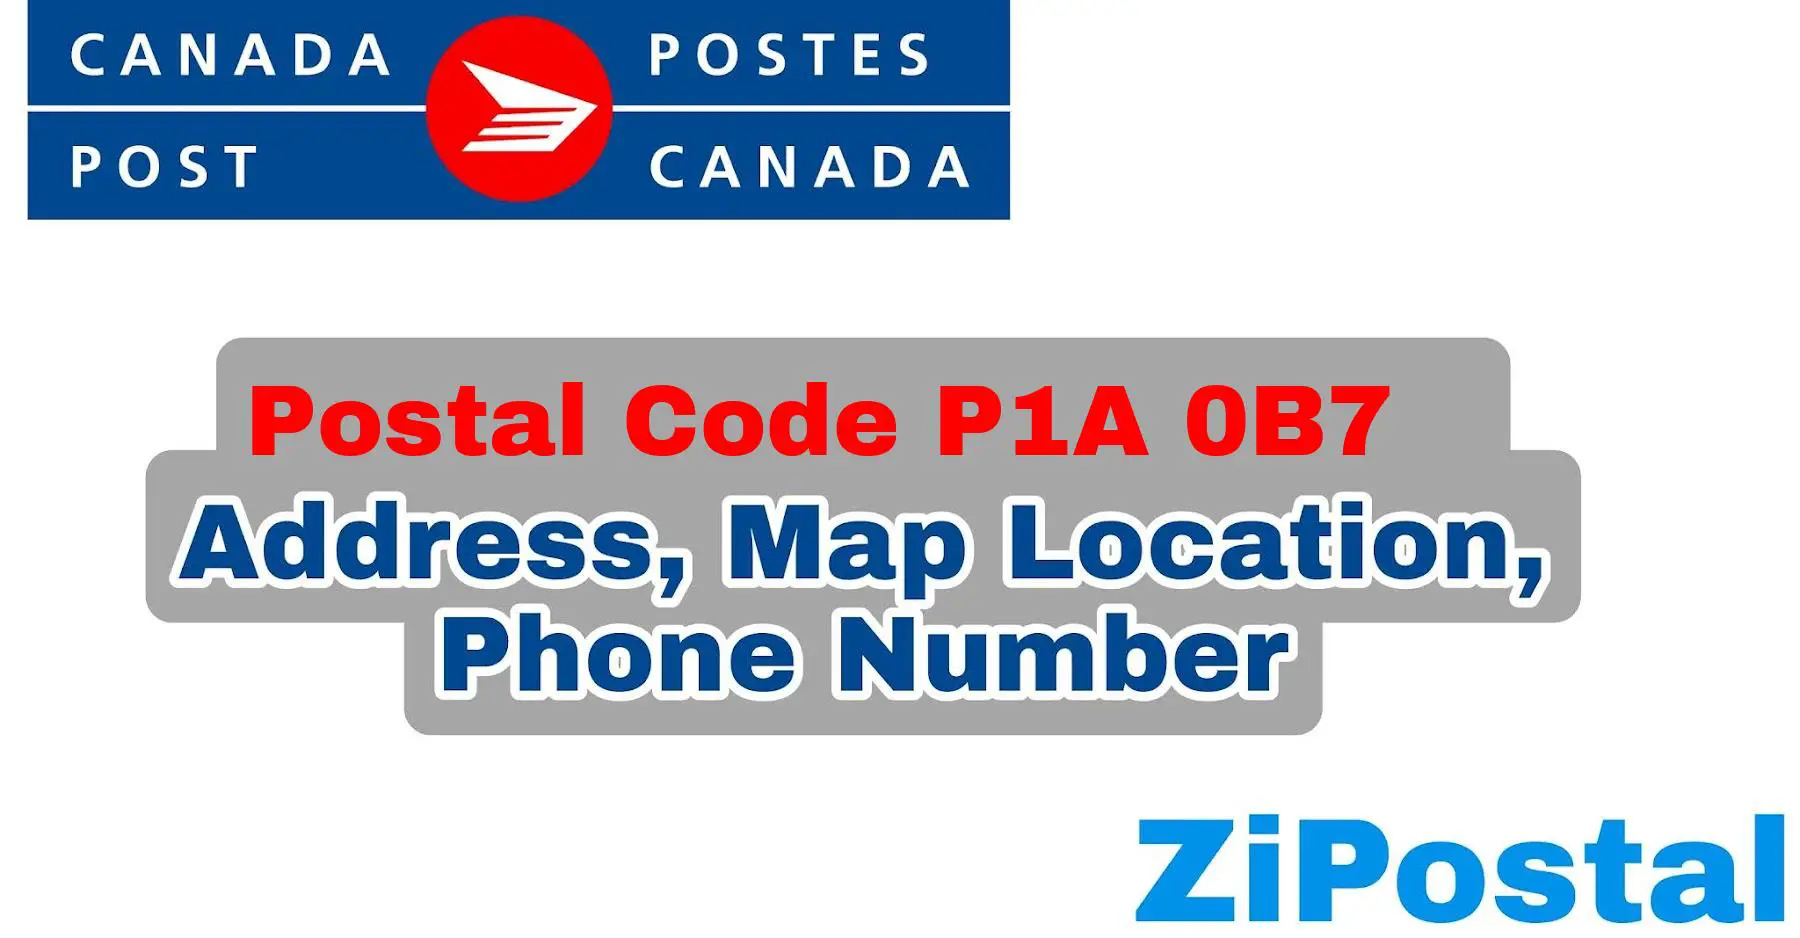 Postal Code P1A 0B7 Address Map Location and Phone Number